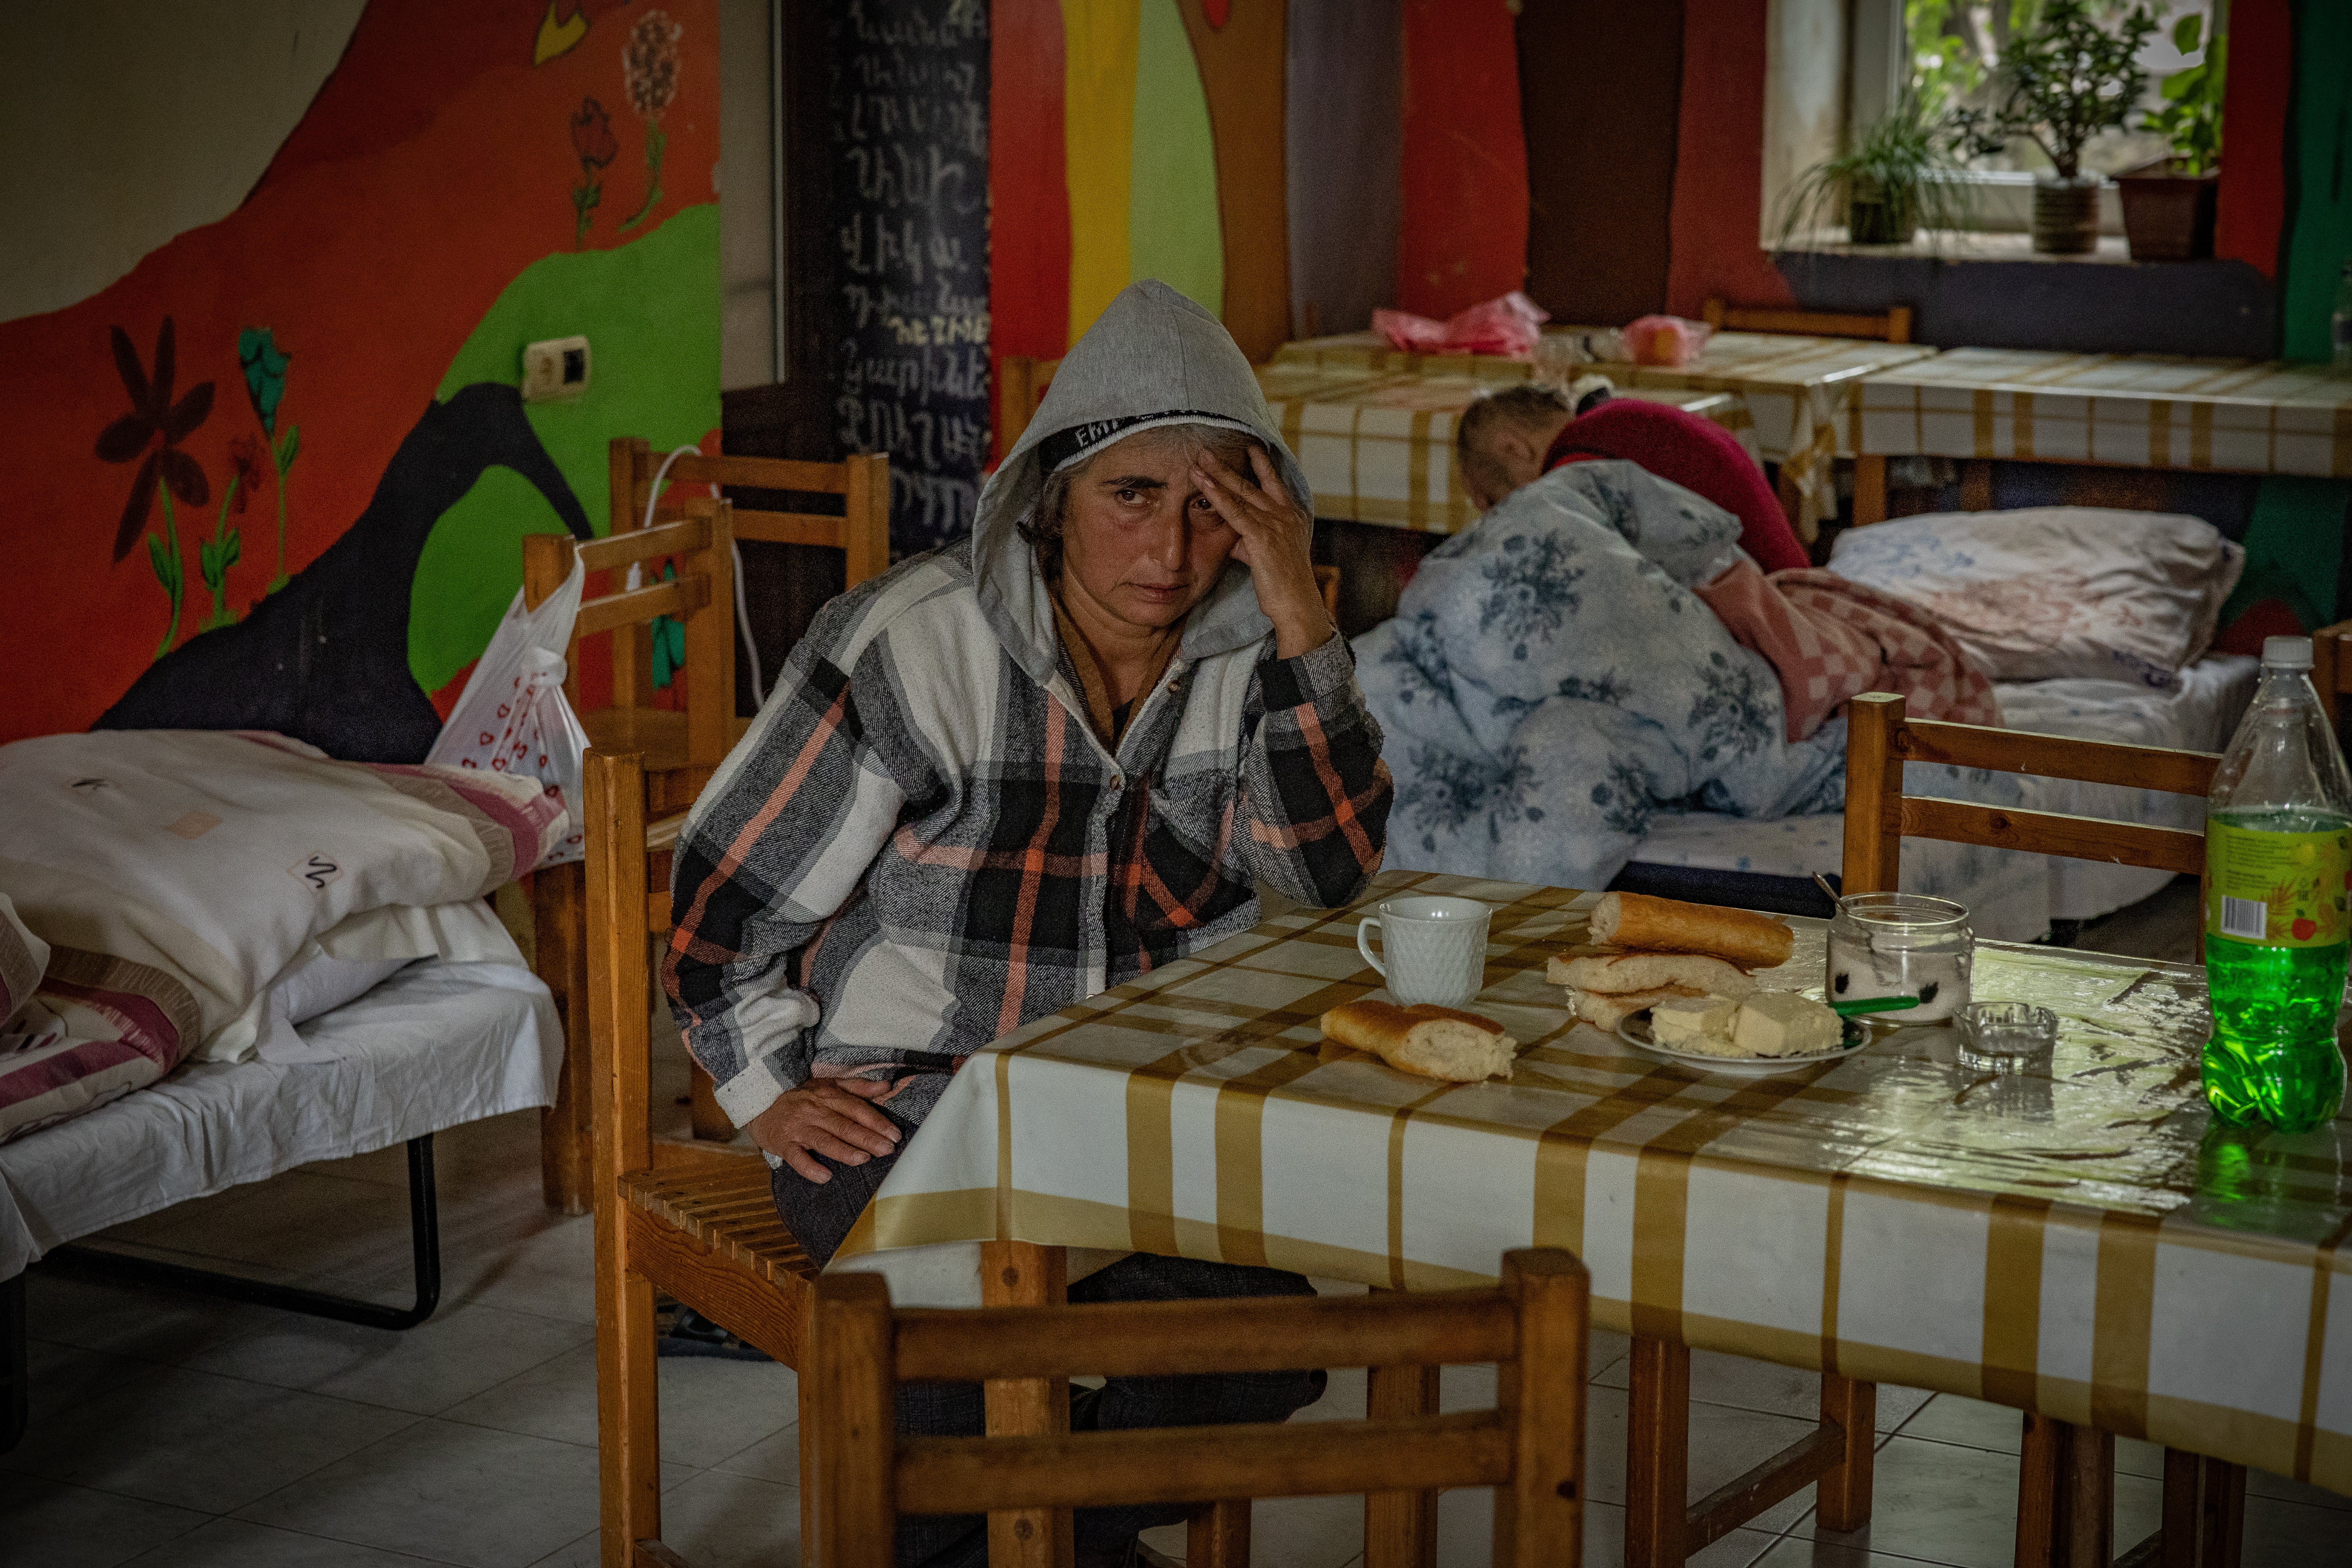 Armenian elderly and injured are camping in schools, hotels and NGO facilities after fleeing Nagorno-Karabakh